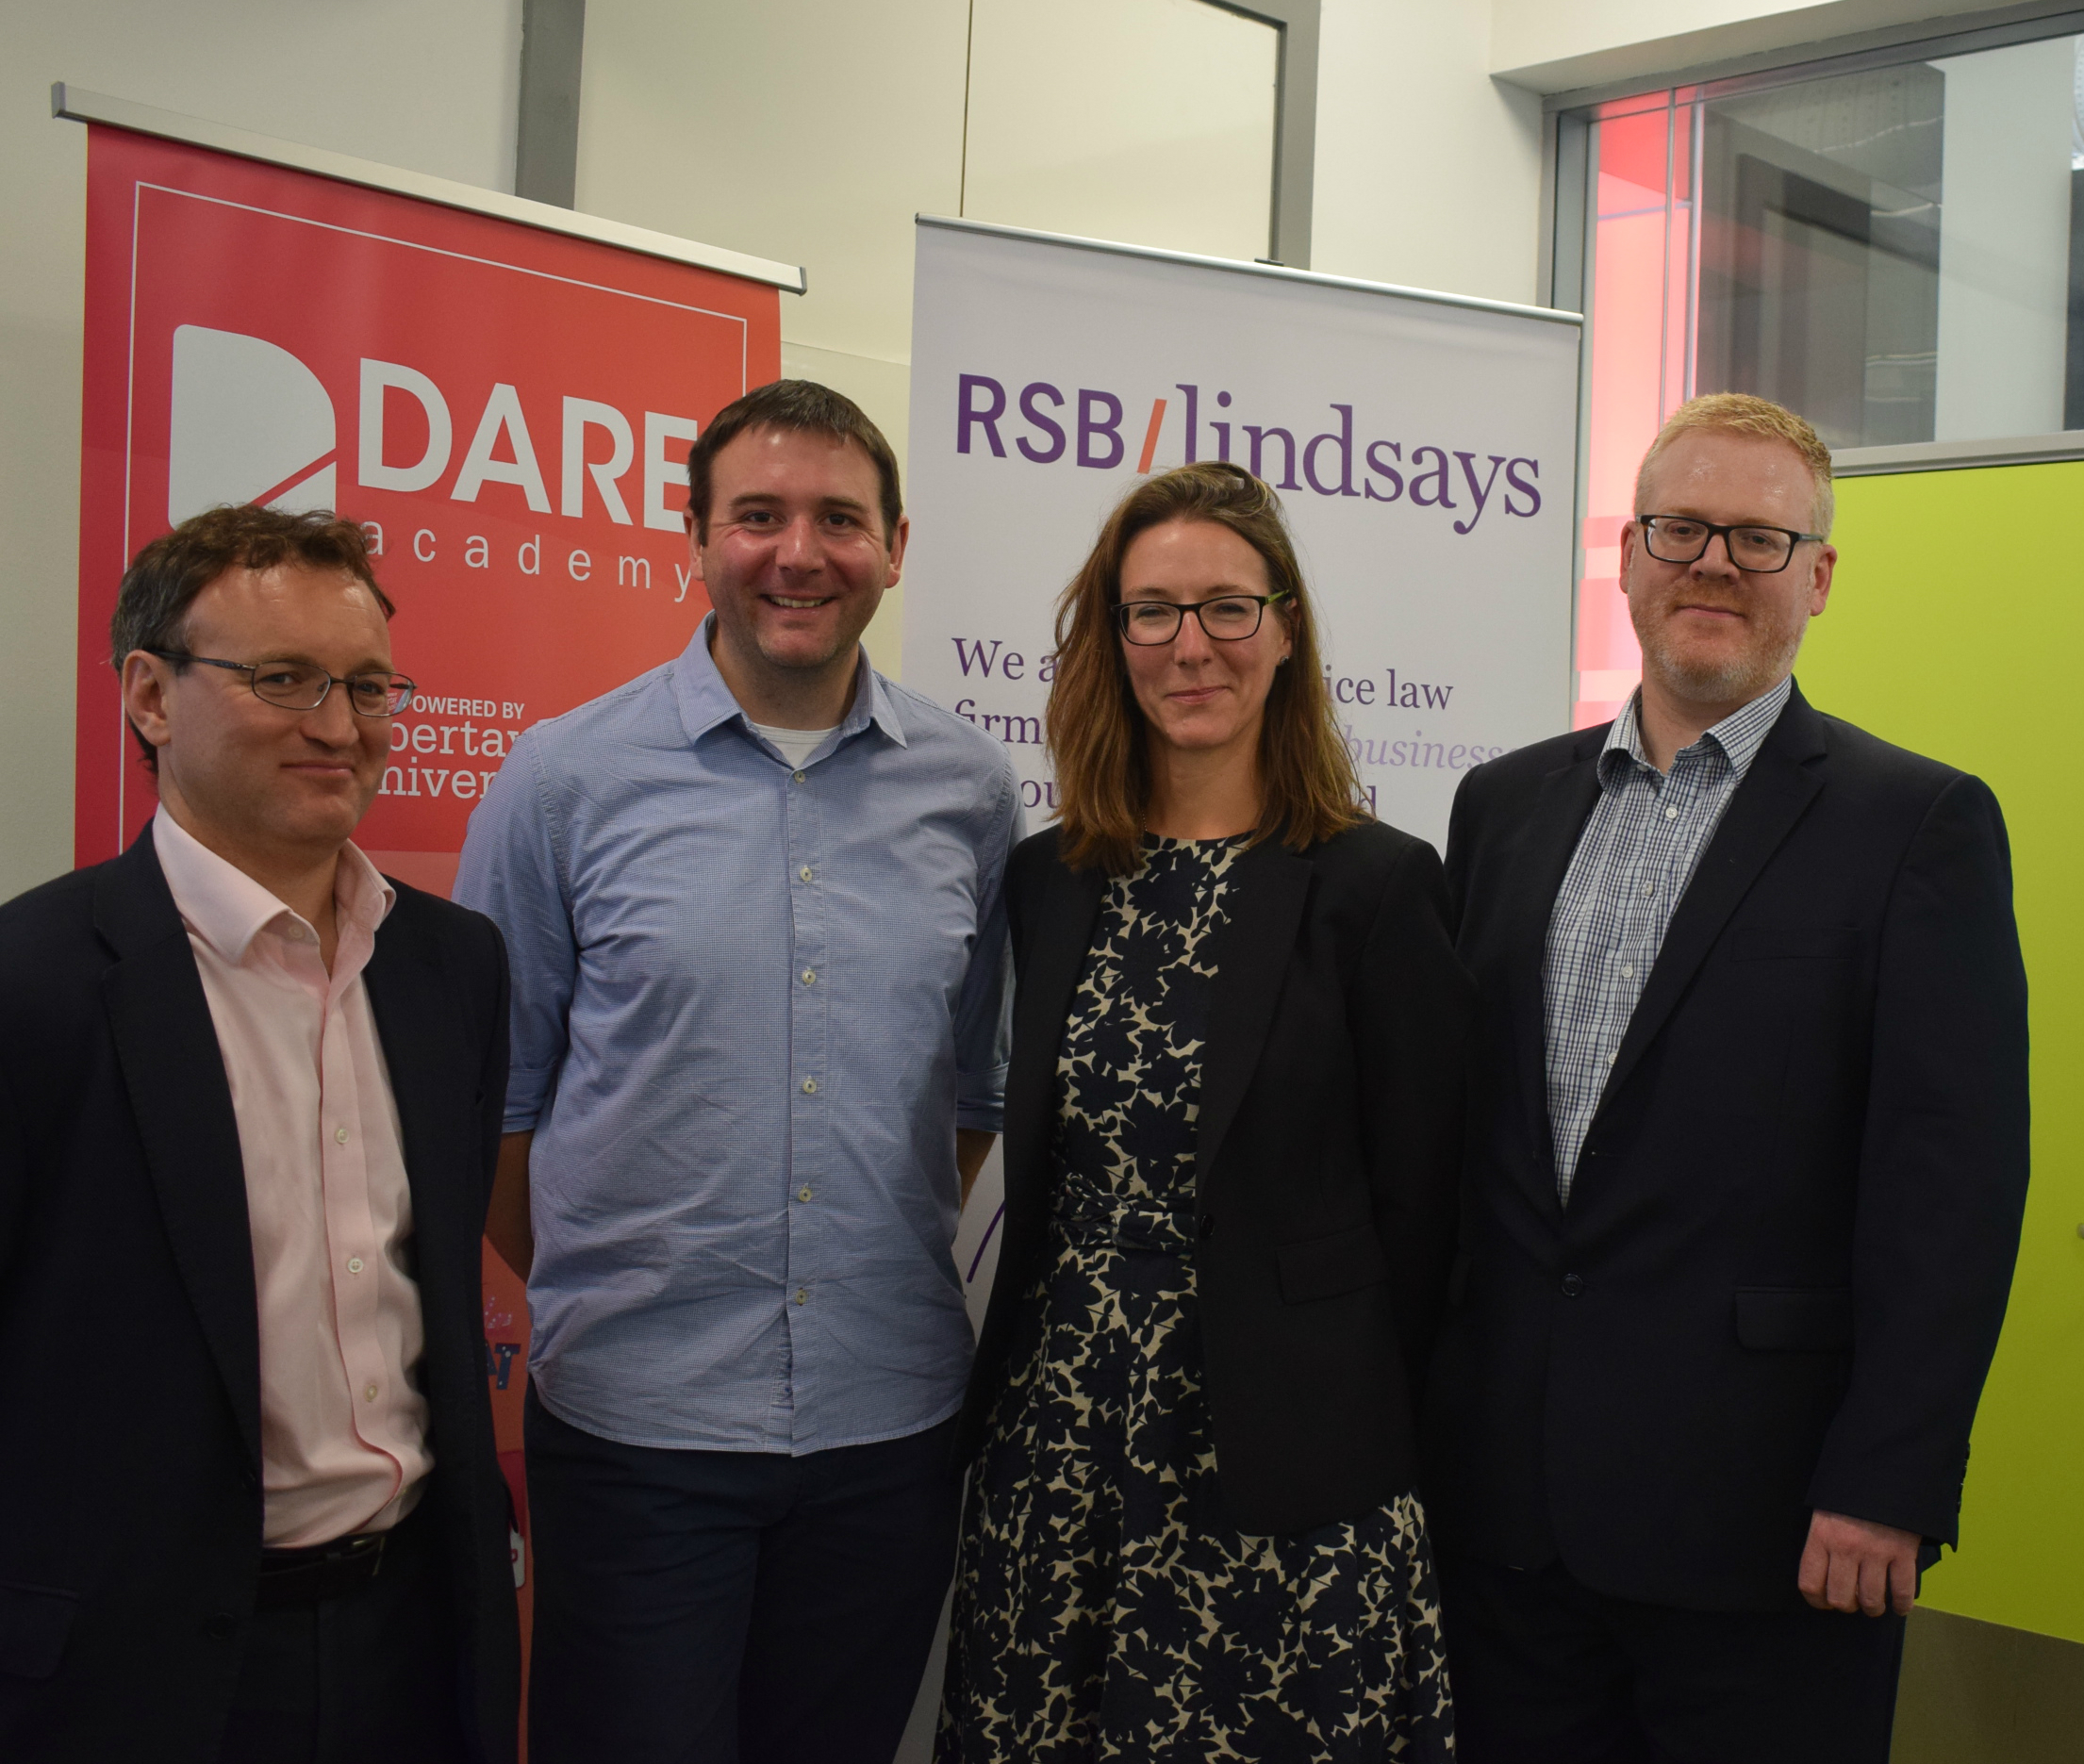 RSB Lindsays in sponsorship deal with Abertay's Dare Academy